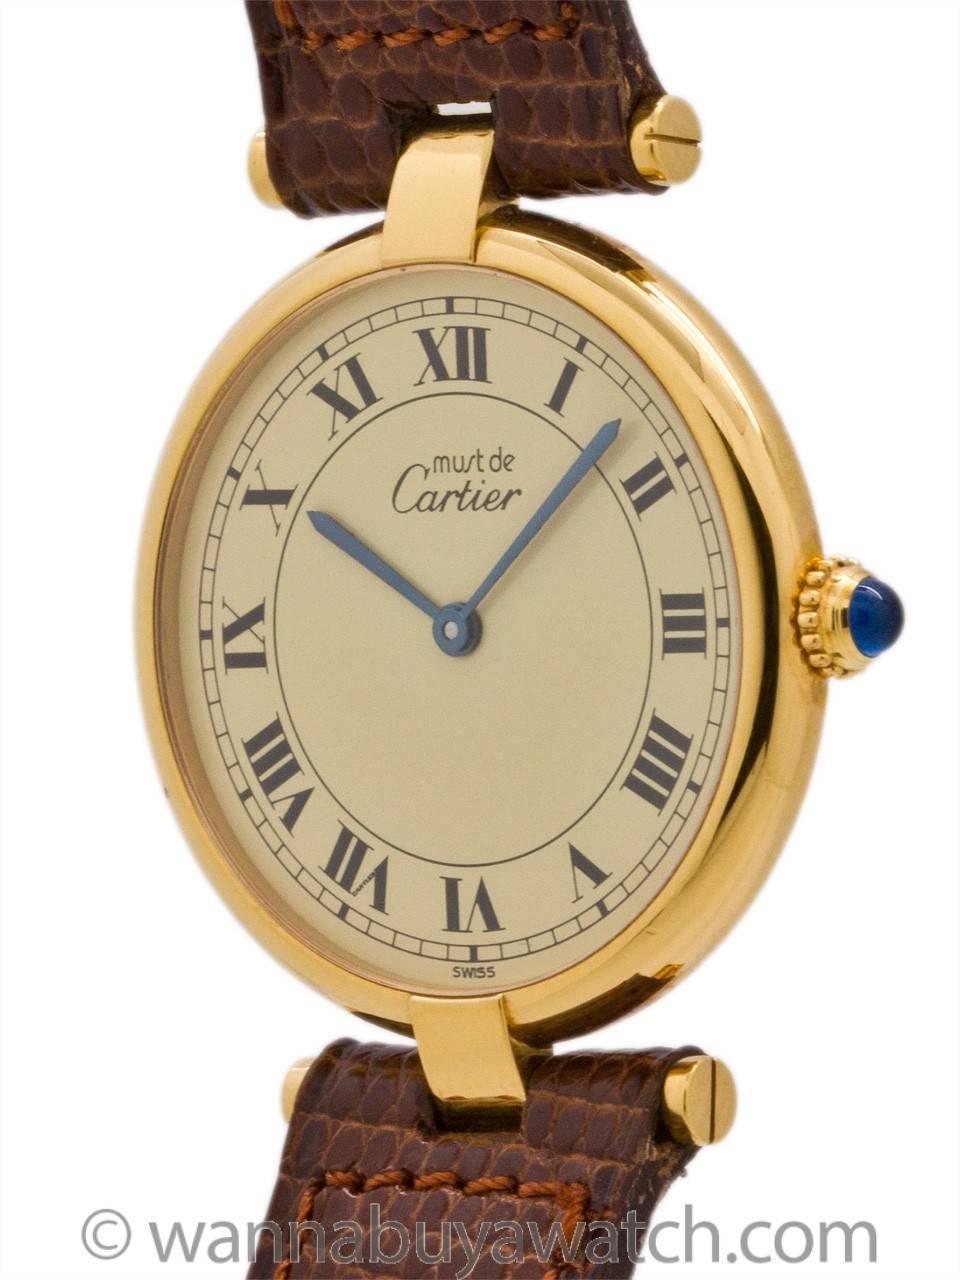 Cartier man’s vermeil Vendome Tank wristwatch circa 1990s. Featuring a round thin case measuring 30.5 x 37mm with T-bar lugs. Featuring original cream dial with classic printed Cartier Roman numbers with blued steel hands and blue sapphire cabochon